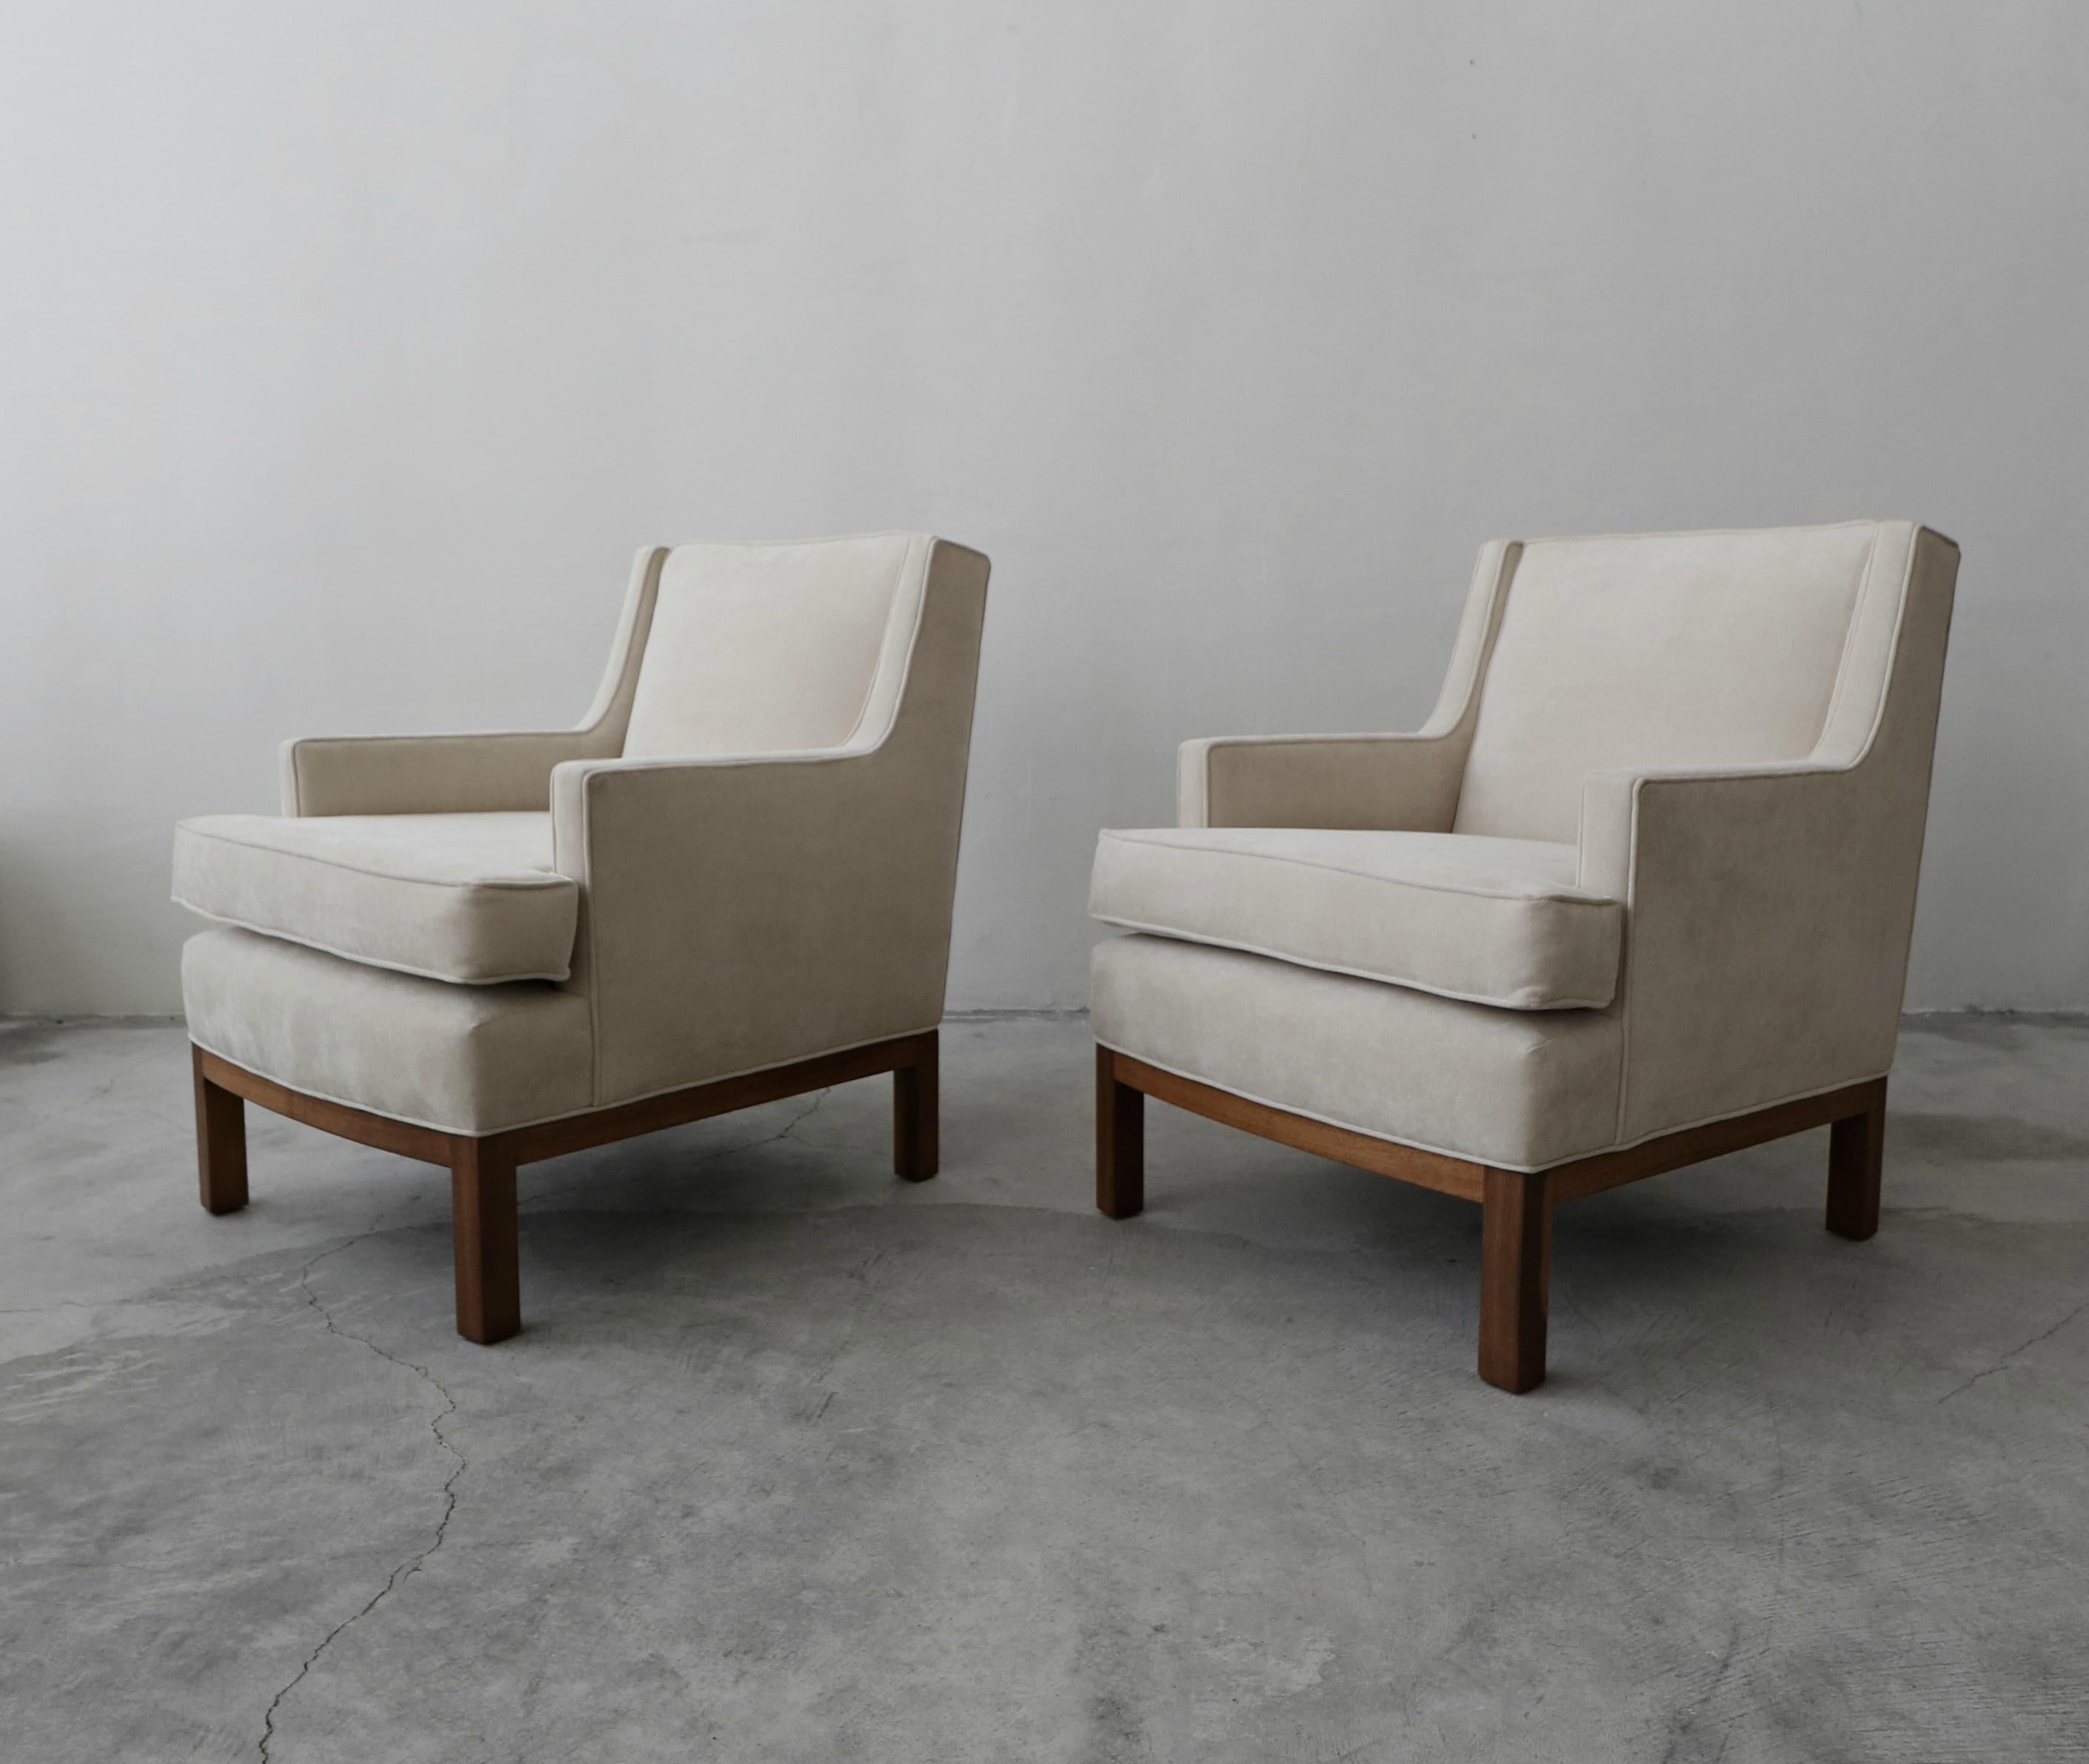 Understated pair of Mid-Century Modern lounge chairs. They are very simple Classic chairs, with gorgeous lines and beautiful walnut bases.

The chairs are in excellent condition, they have been completely restored with all new foam and fabric.